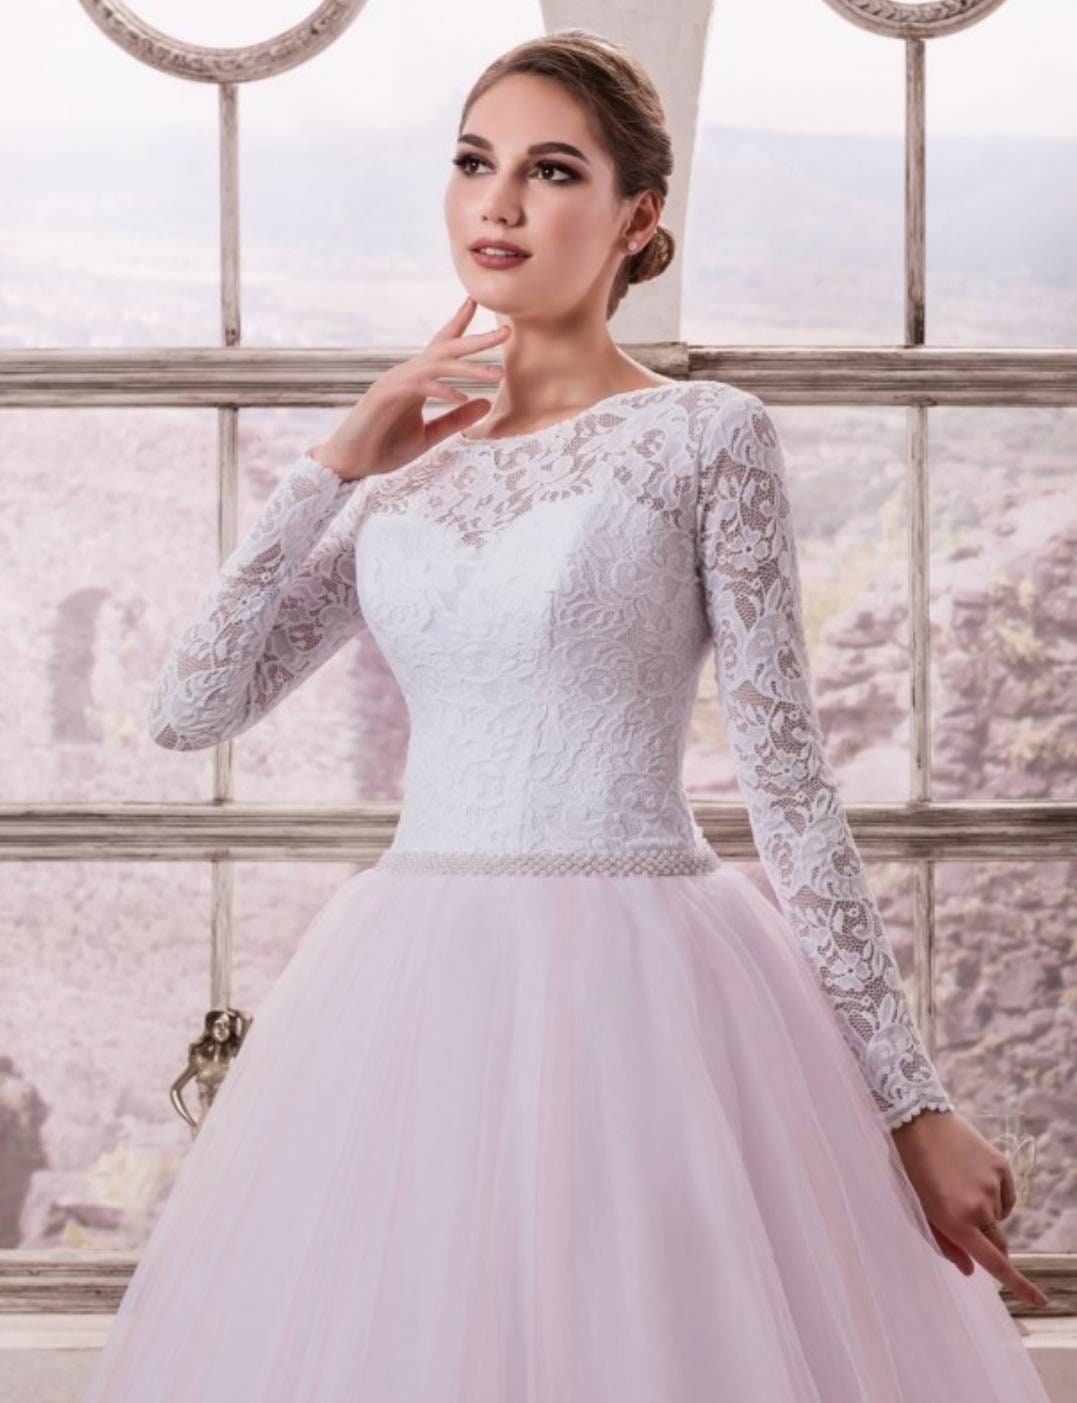 White Lace Wedding Dress With Long Sleeves and Pink Tulle - Etsy